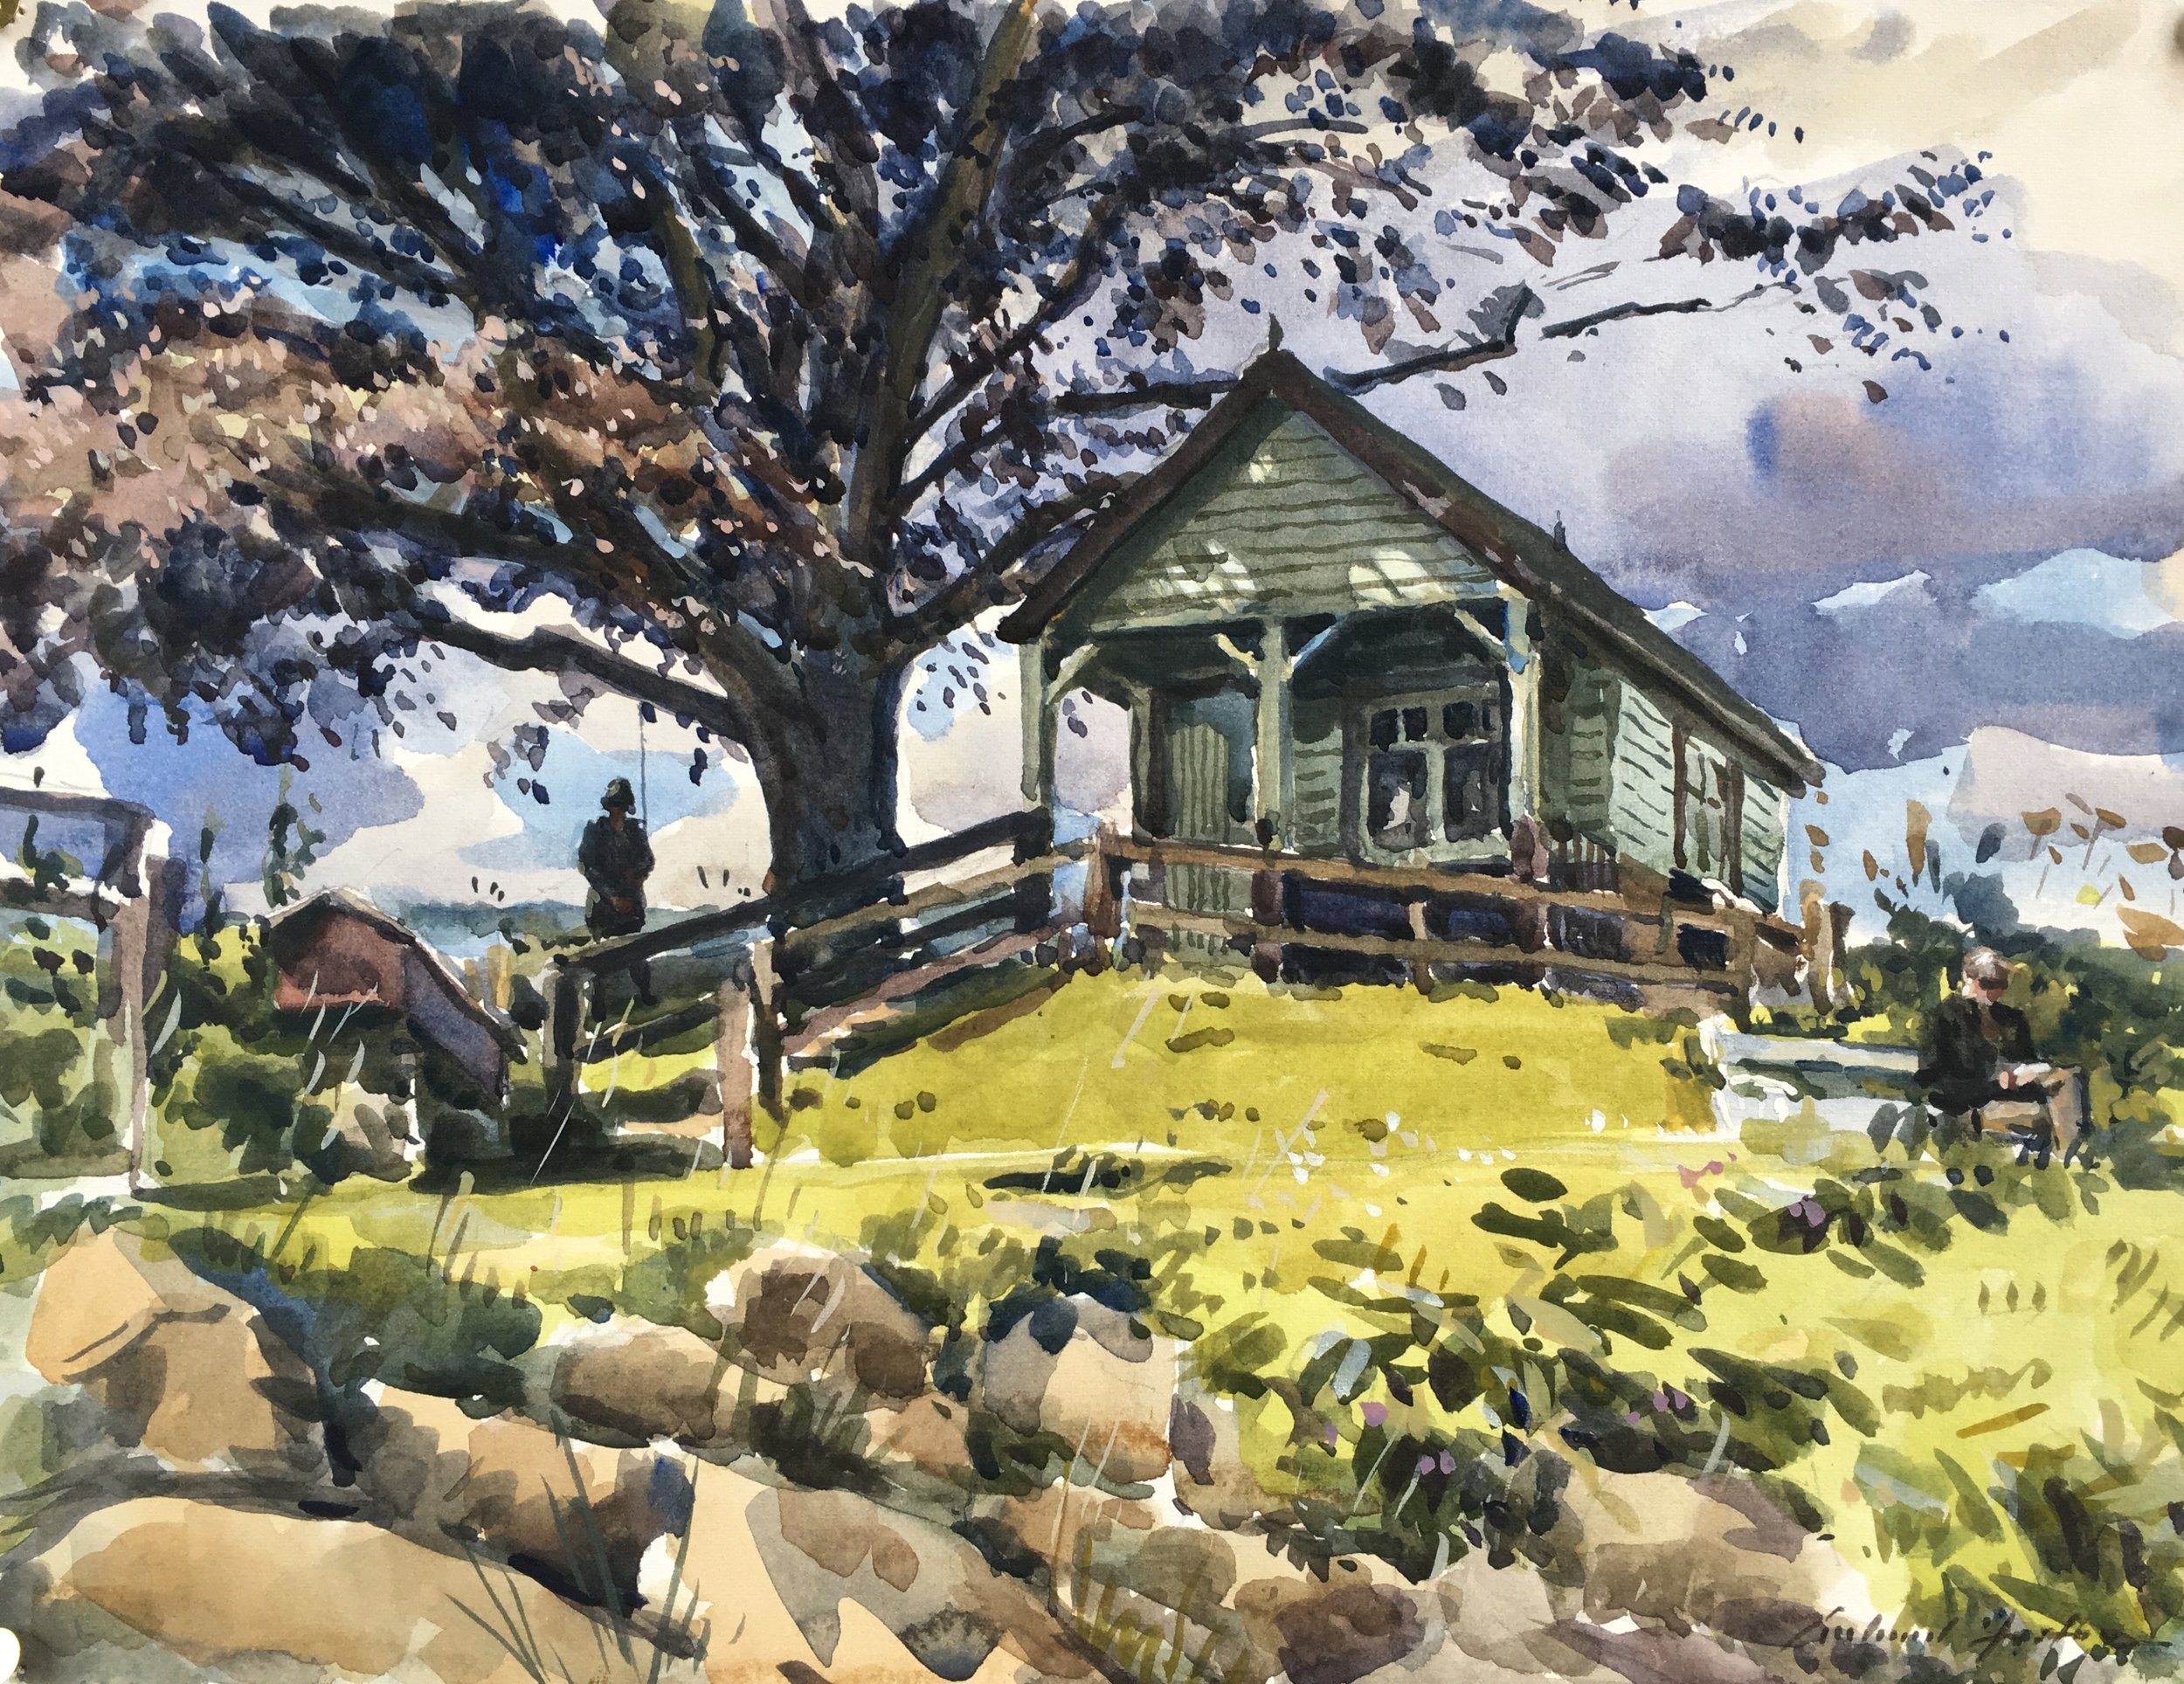 The Hut with Gina, watercolour, 10 x 14.JPG